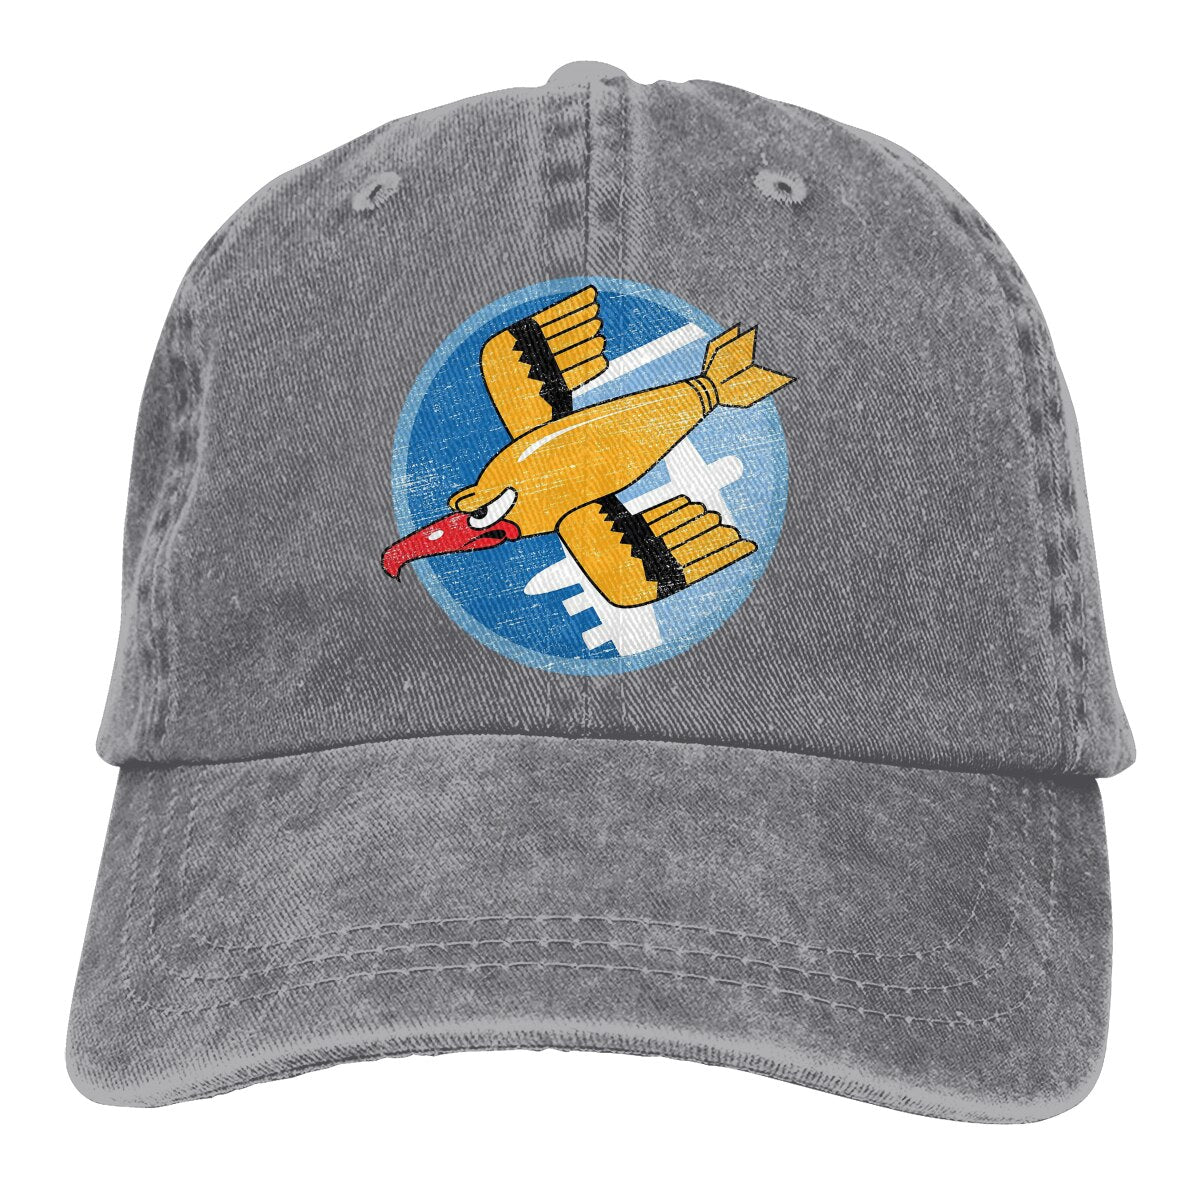 91st Bomb Squadron Flying Fortress Patch Gear The Baseball Cap Peaked capt Sport Unisex Outdoor Custom ww2 WWII World War 2 Hats